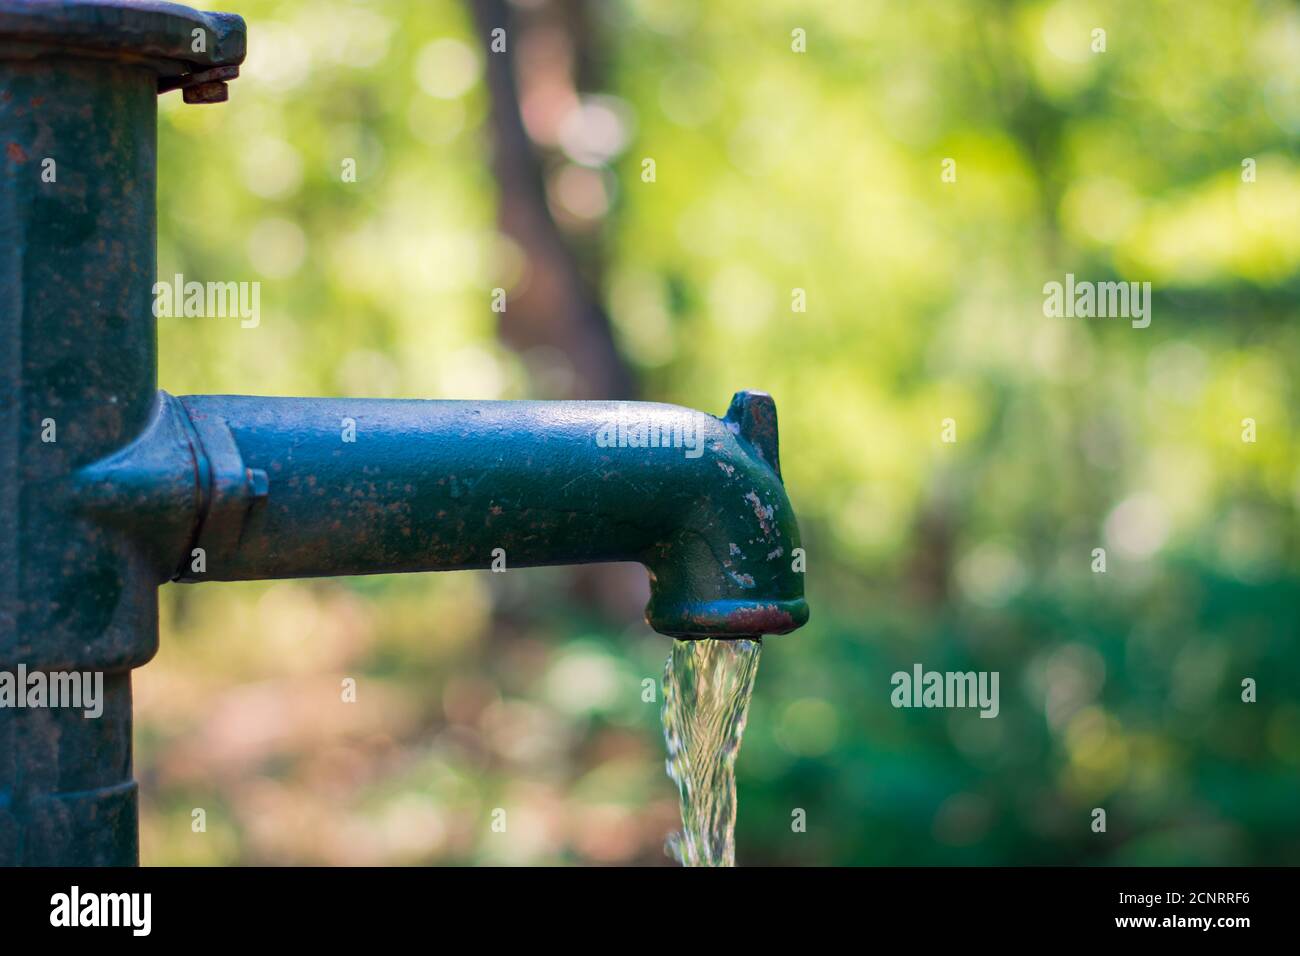 Manual old green and rusty water lever pump with water pouring out of the spout with a blurred green background Stock Photo